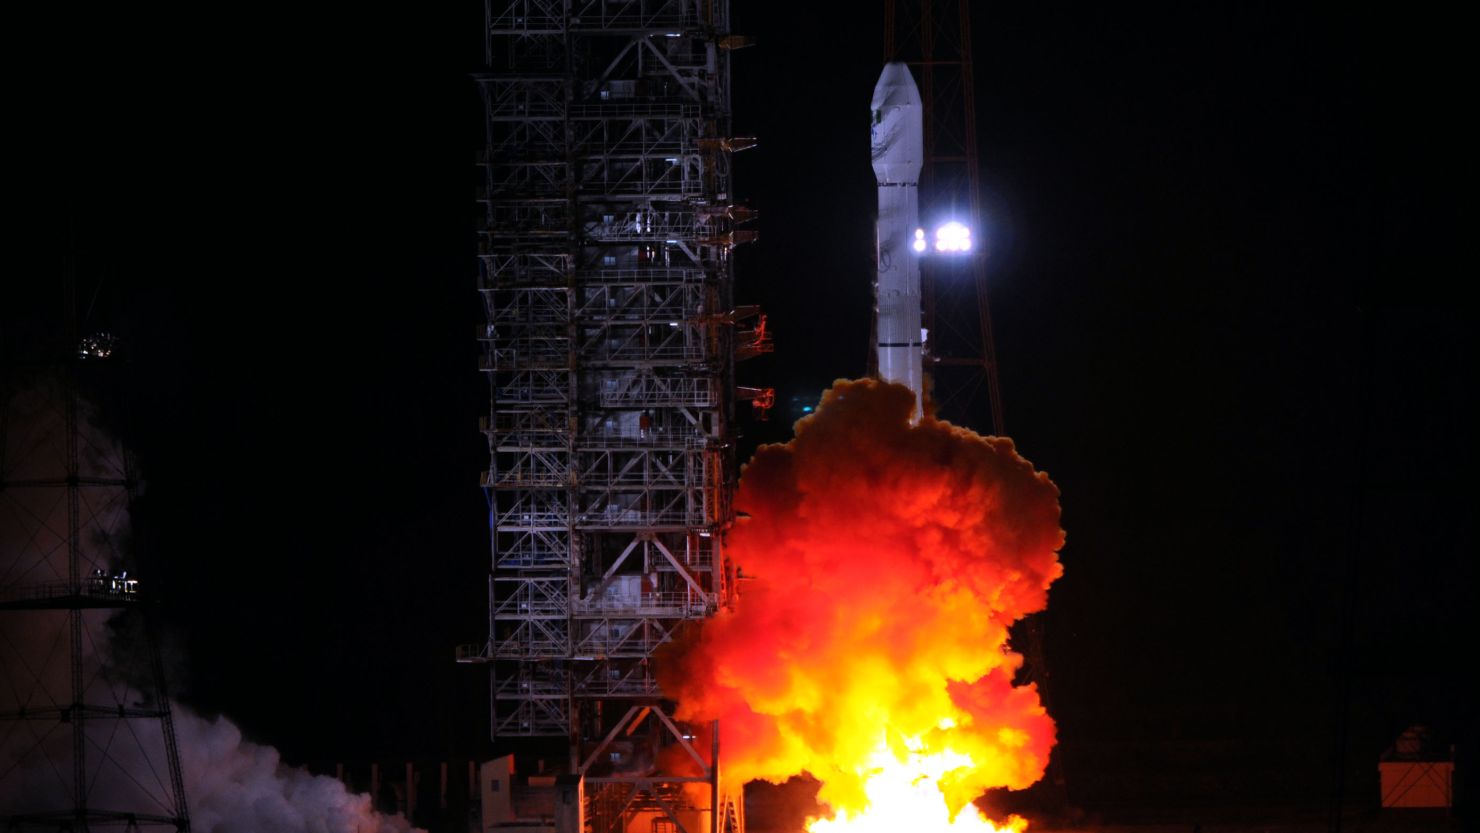 Long March-3B carrier rocket blasts off from the launch pad at the Xichang Satellite Launch Center on December 20, 2011.